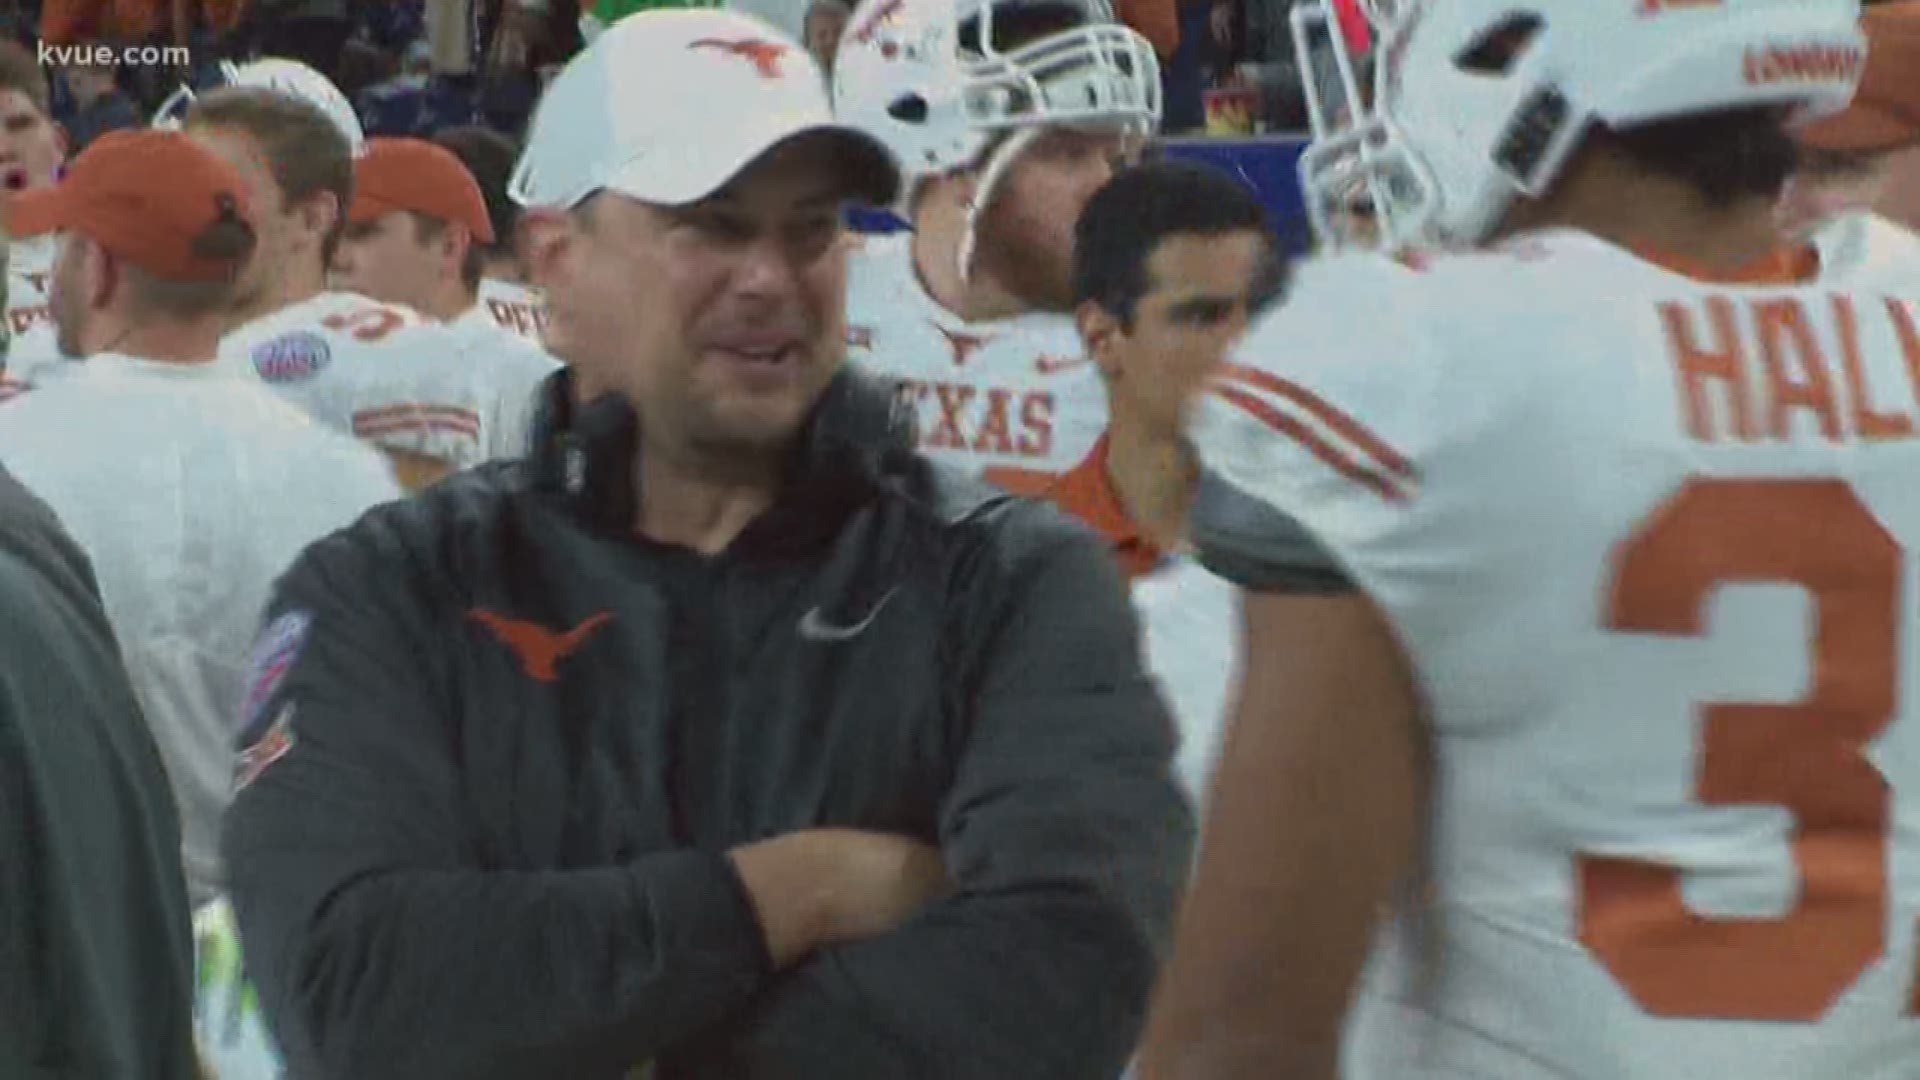 Multiple reports have mentioned Tom Herman as the unnamed Ohio State coach who was with former assistant Zach Smith on the recruiting trip.